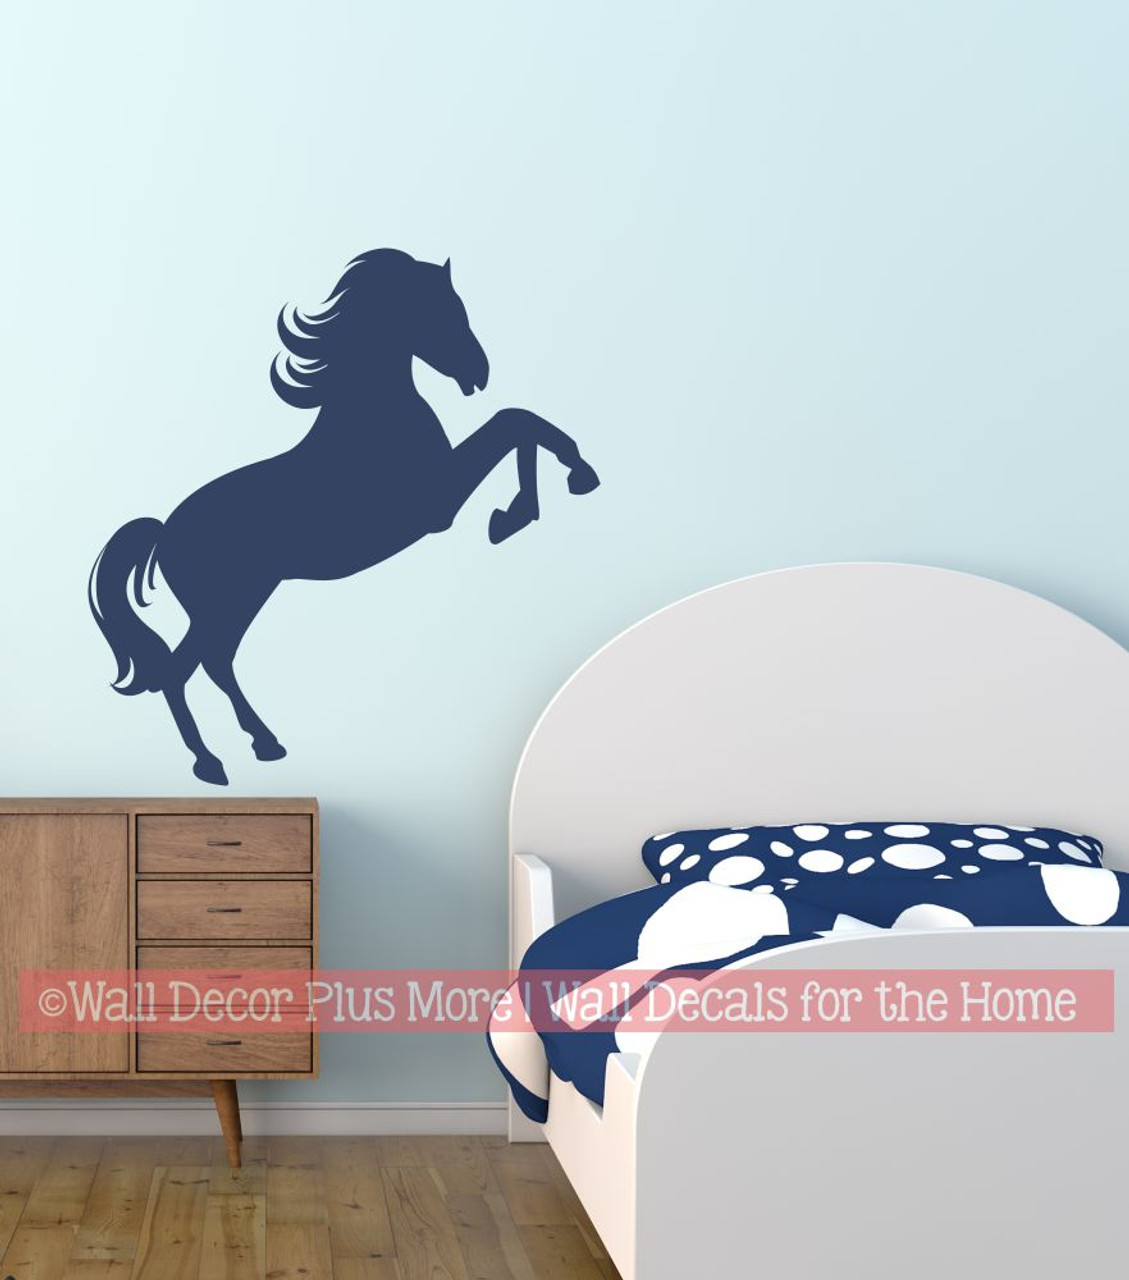 Jumping Horse Silhouette Wall Stickers Decals Western Wall Stickers